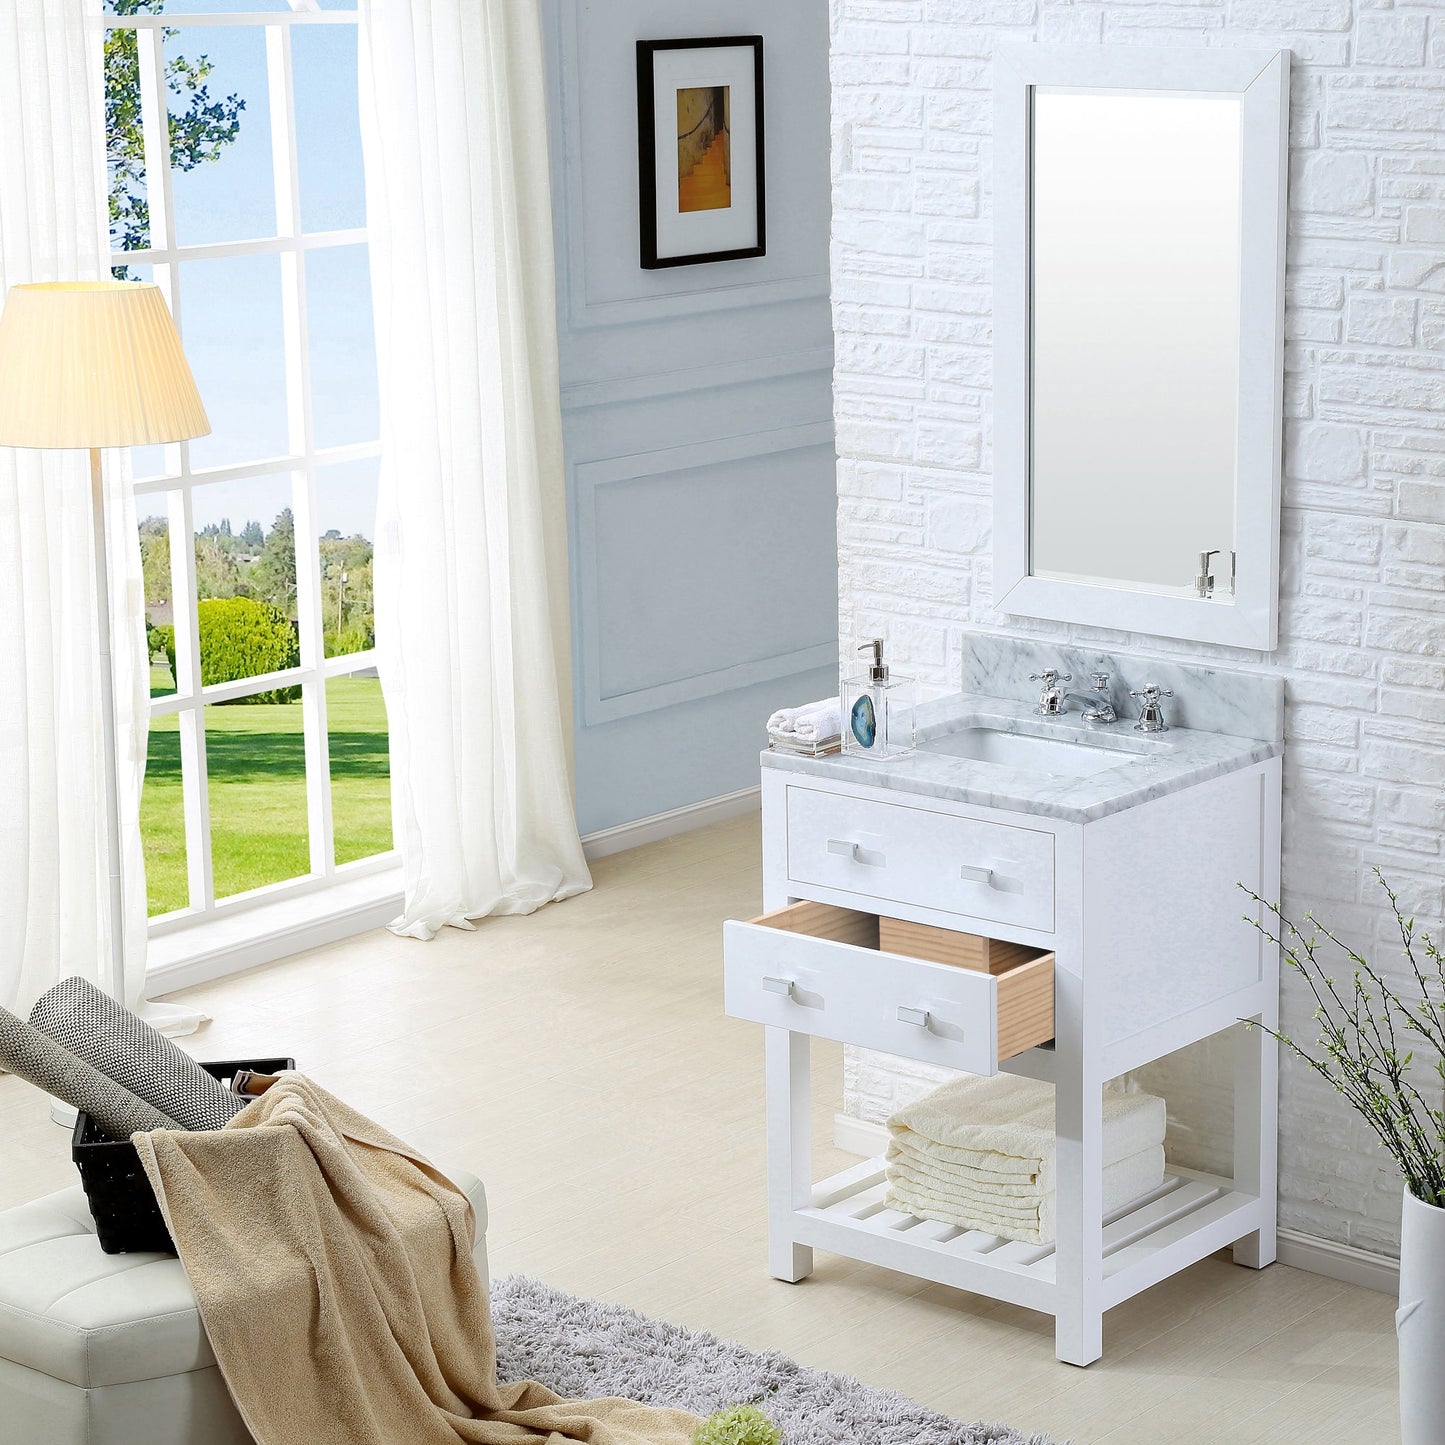 24 Inch Pure White Single Sink Bathroom Vanity From The Madalyn Collection